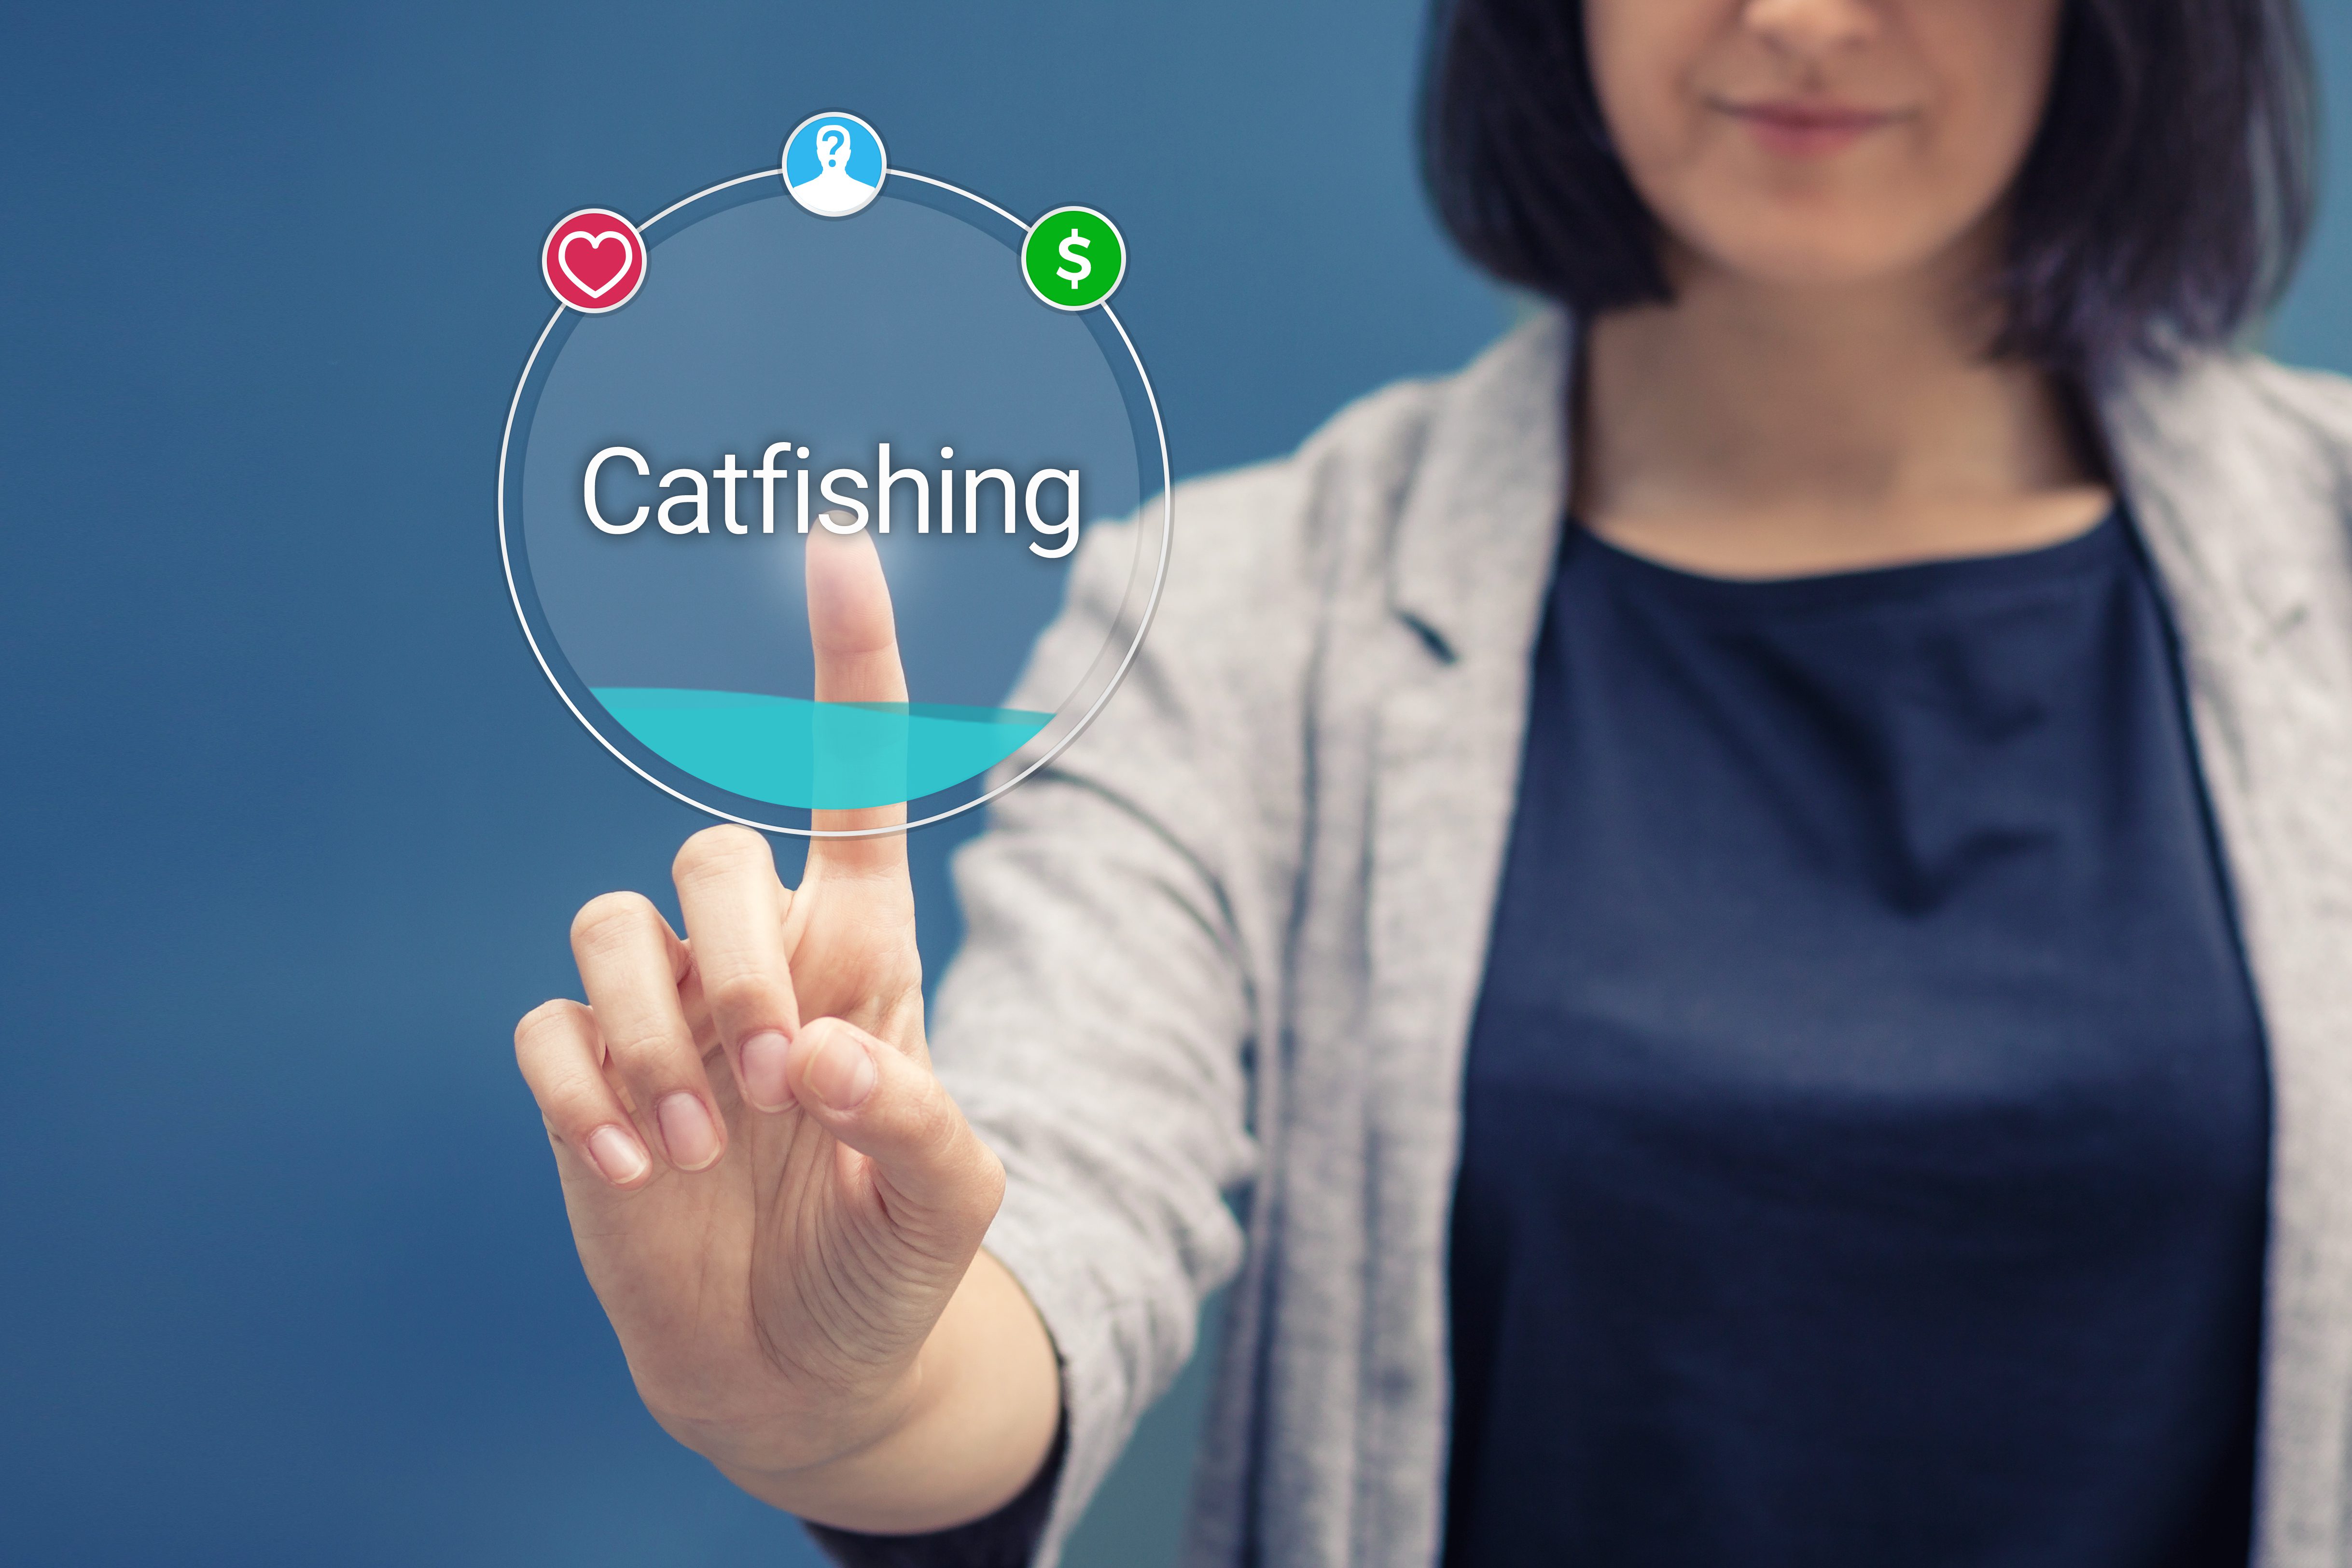 Online Dating: How Should I Proceed If Someone Is Trying To Catfish Me?